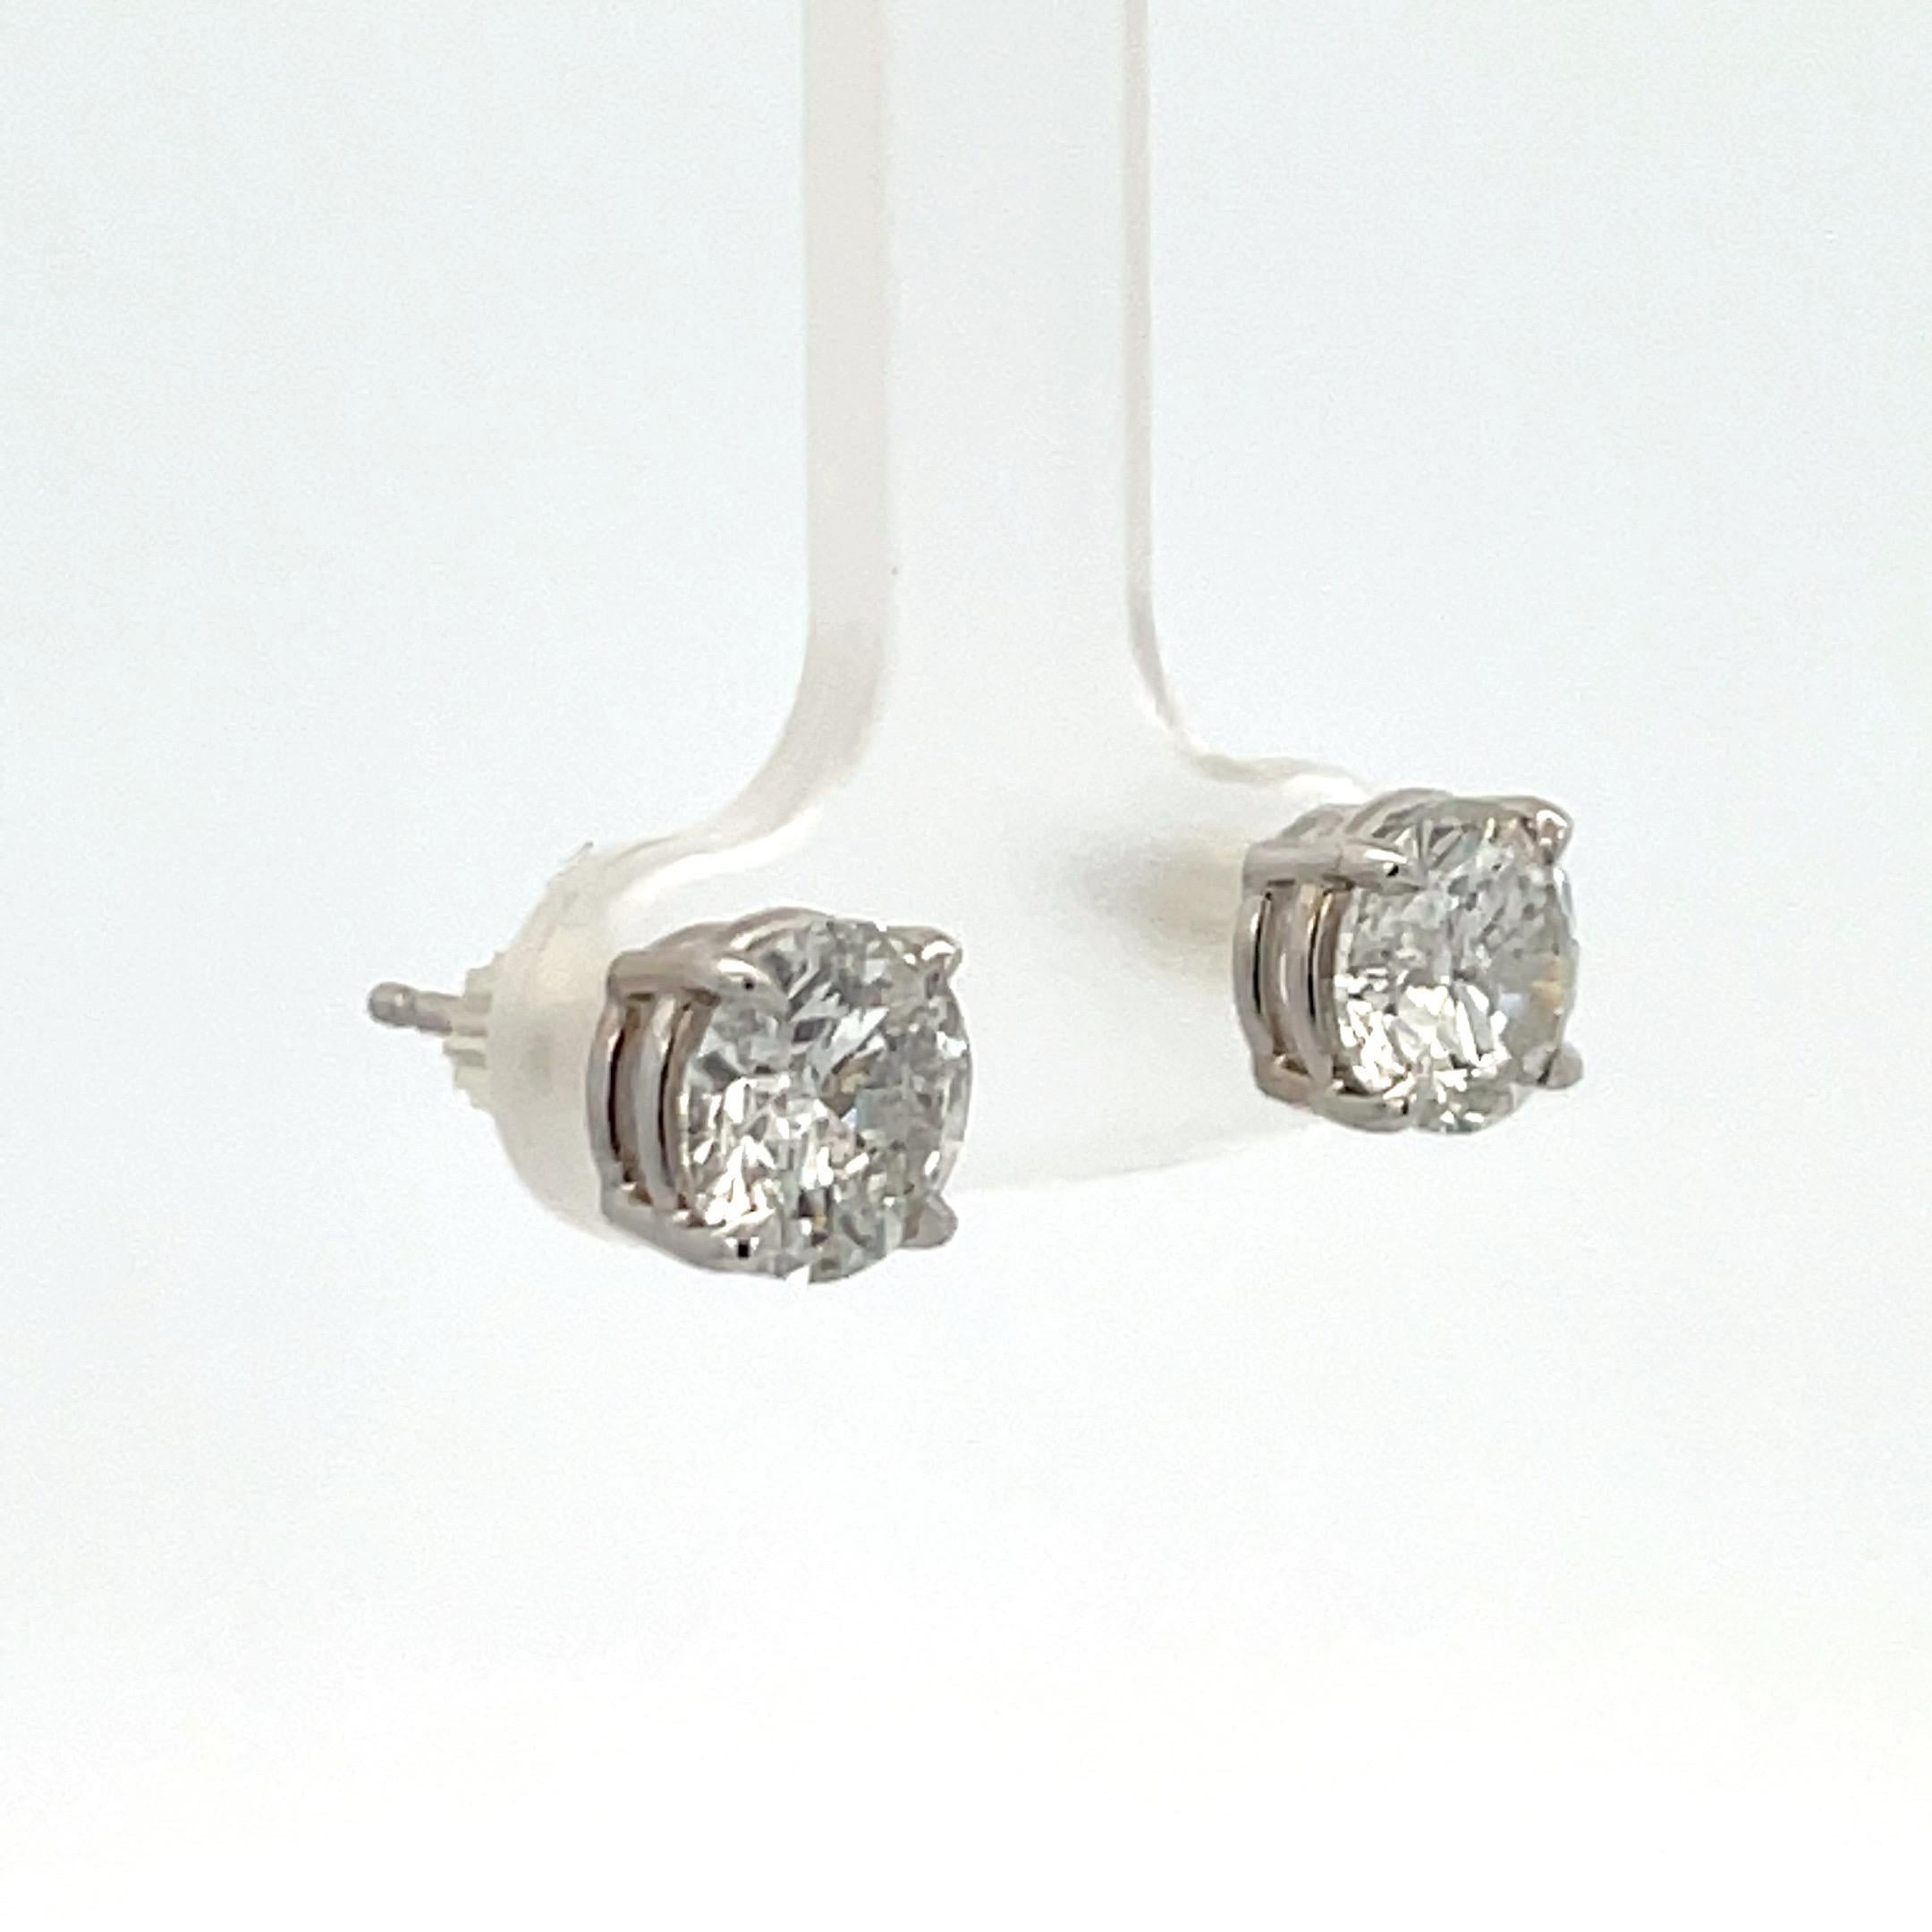 Diamond Stud earrings weighing 2.49 Carats in a 4 prong Basket Setting. 
Color H-I
Clarity I1
Sparkle & Eye Clean!
Setting can be changed to a Basket, Martini or Champagne/ 3 or 4 Prong/ 14 or 18 Karat.

DM for more Info & Videos on my ear.
More